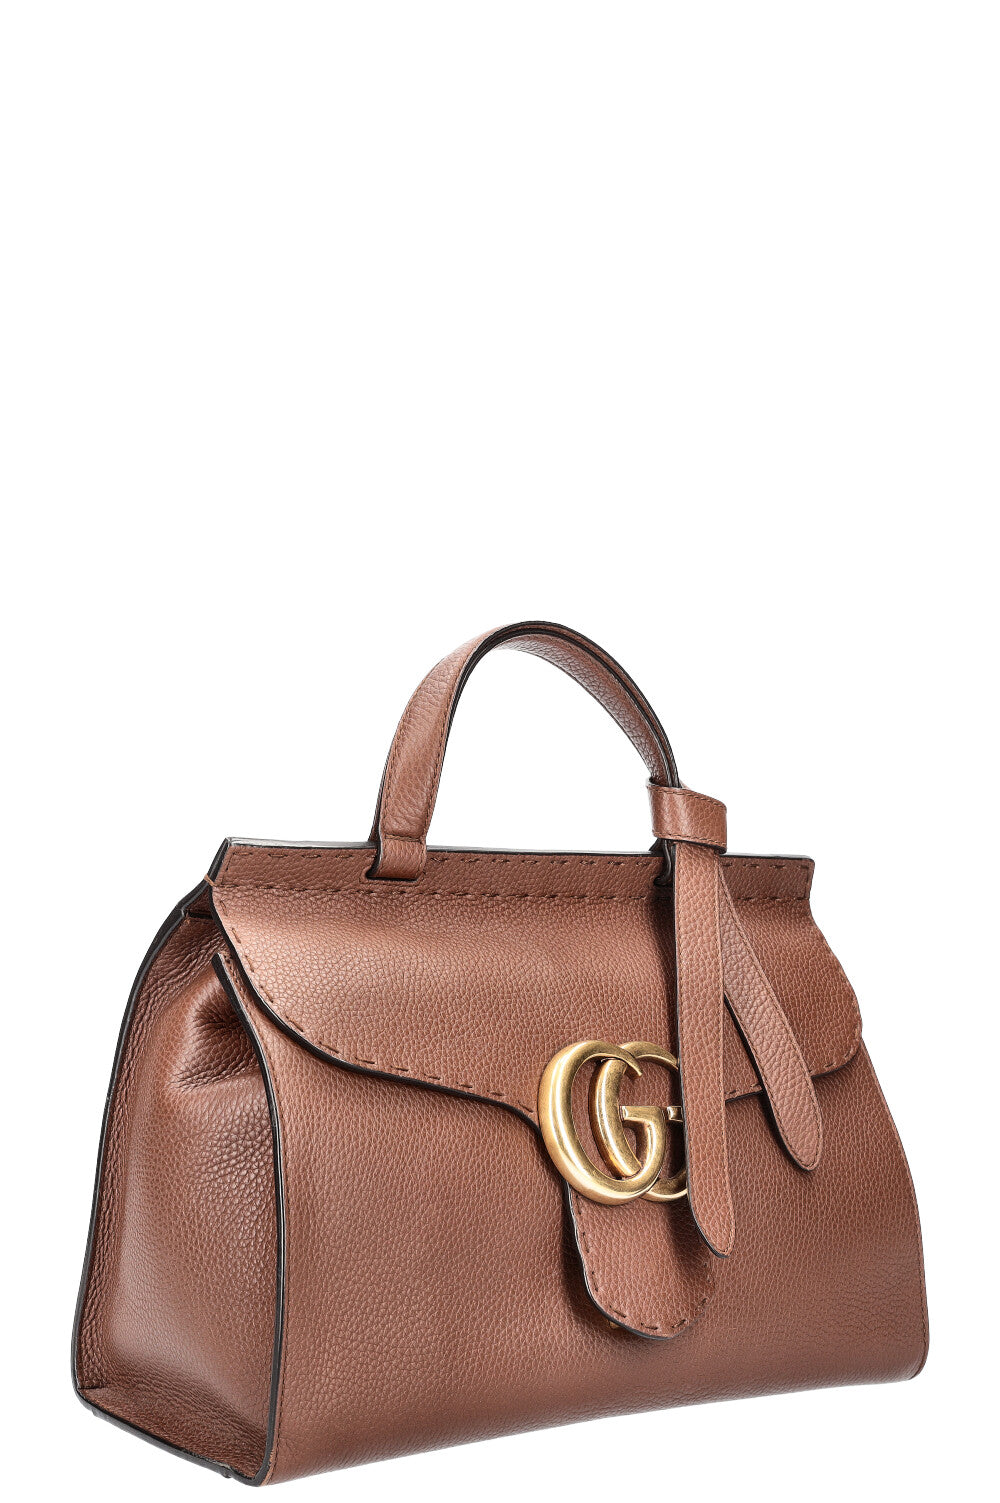 Gucci GG Marmont Leather Top Handle Bag - Nut Brown Leather